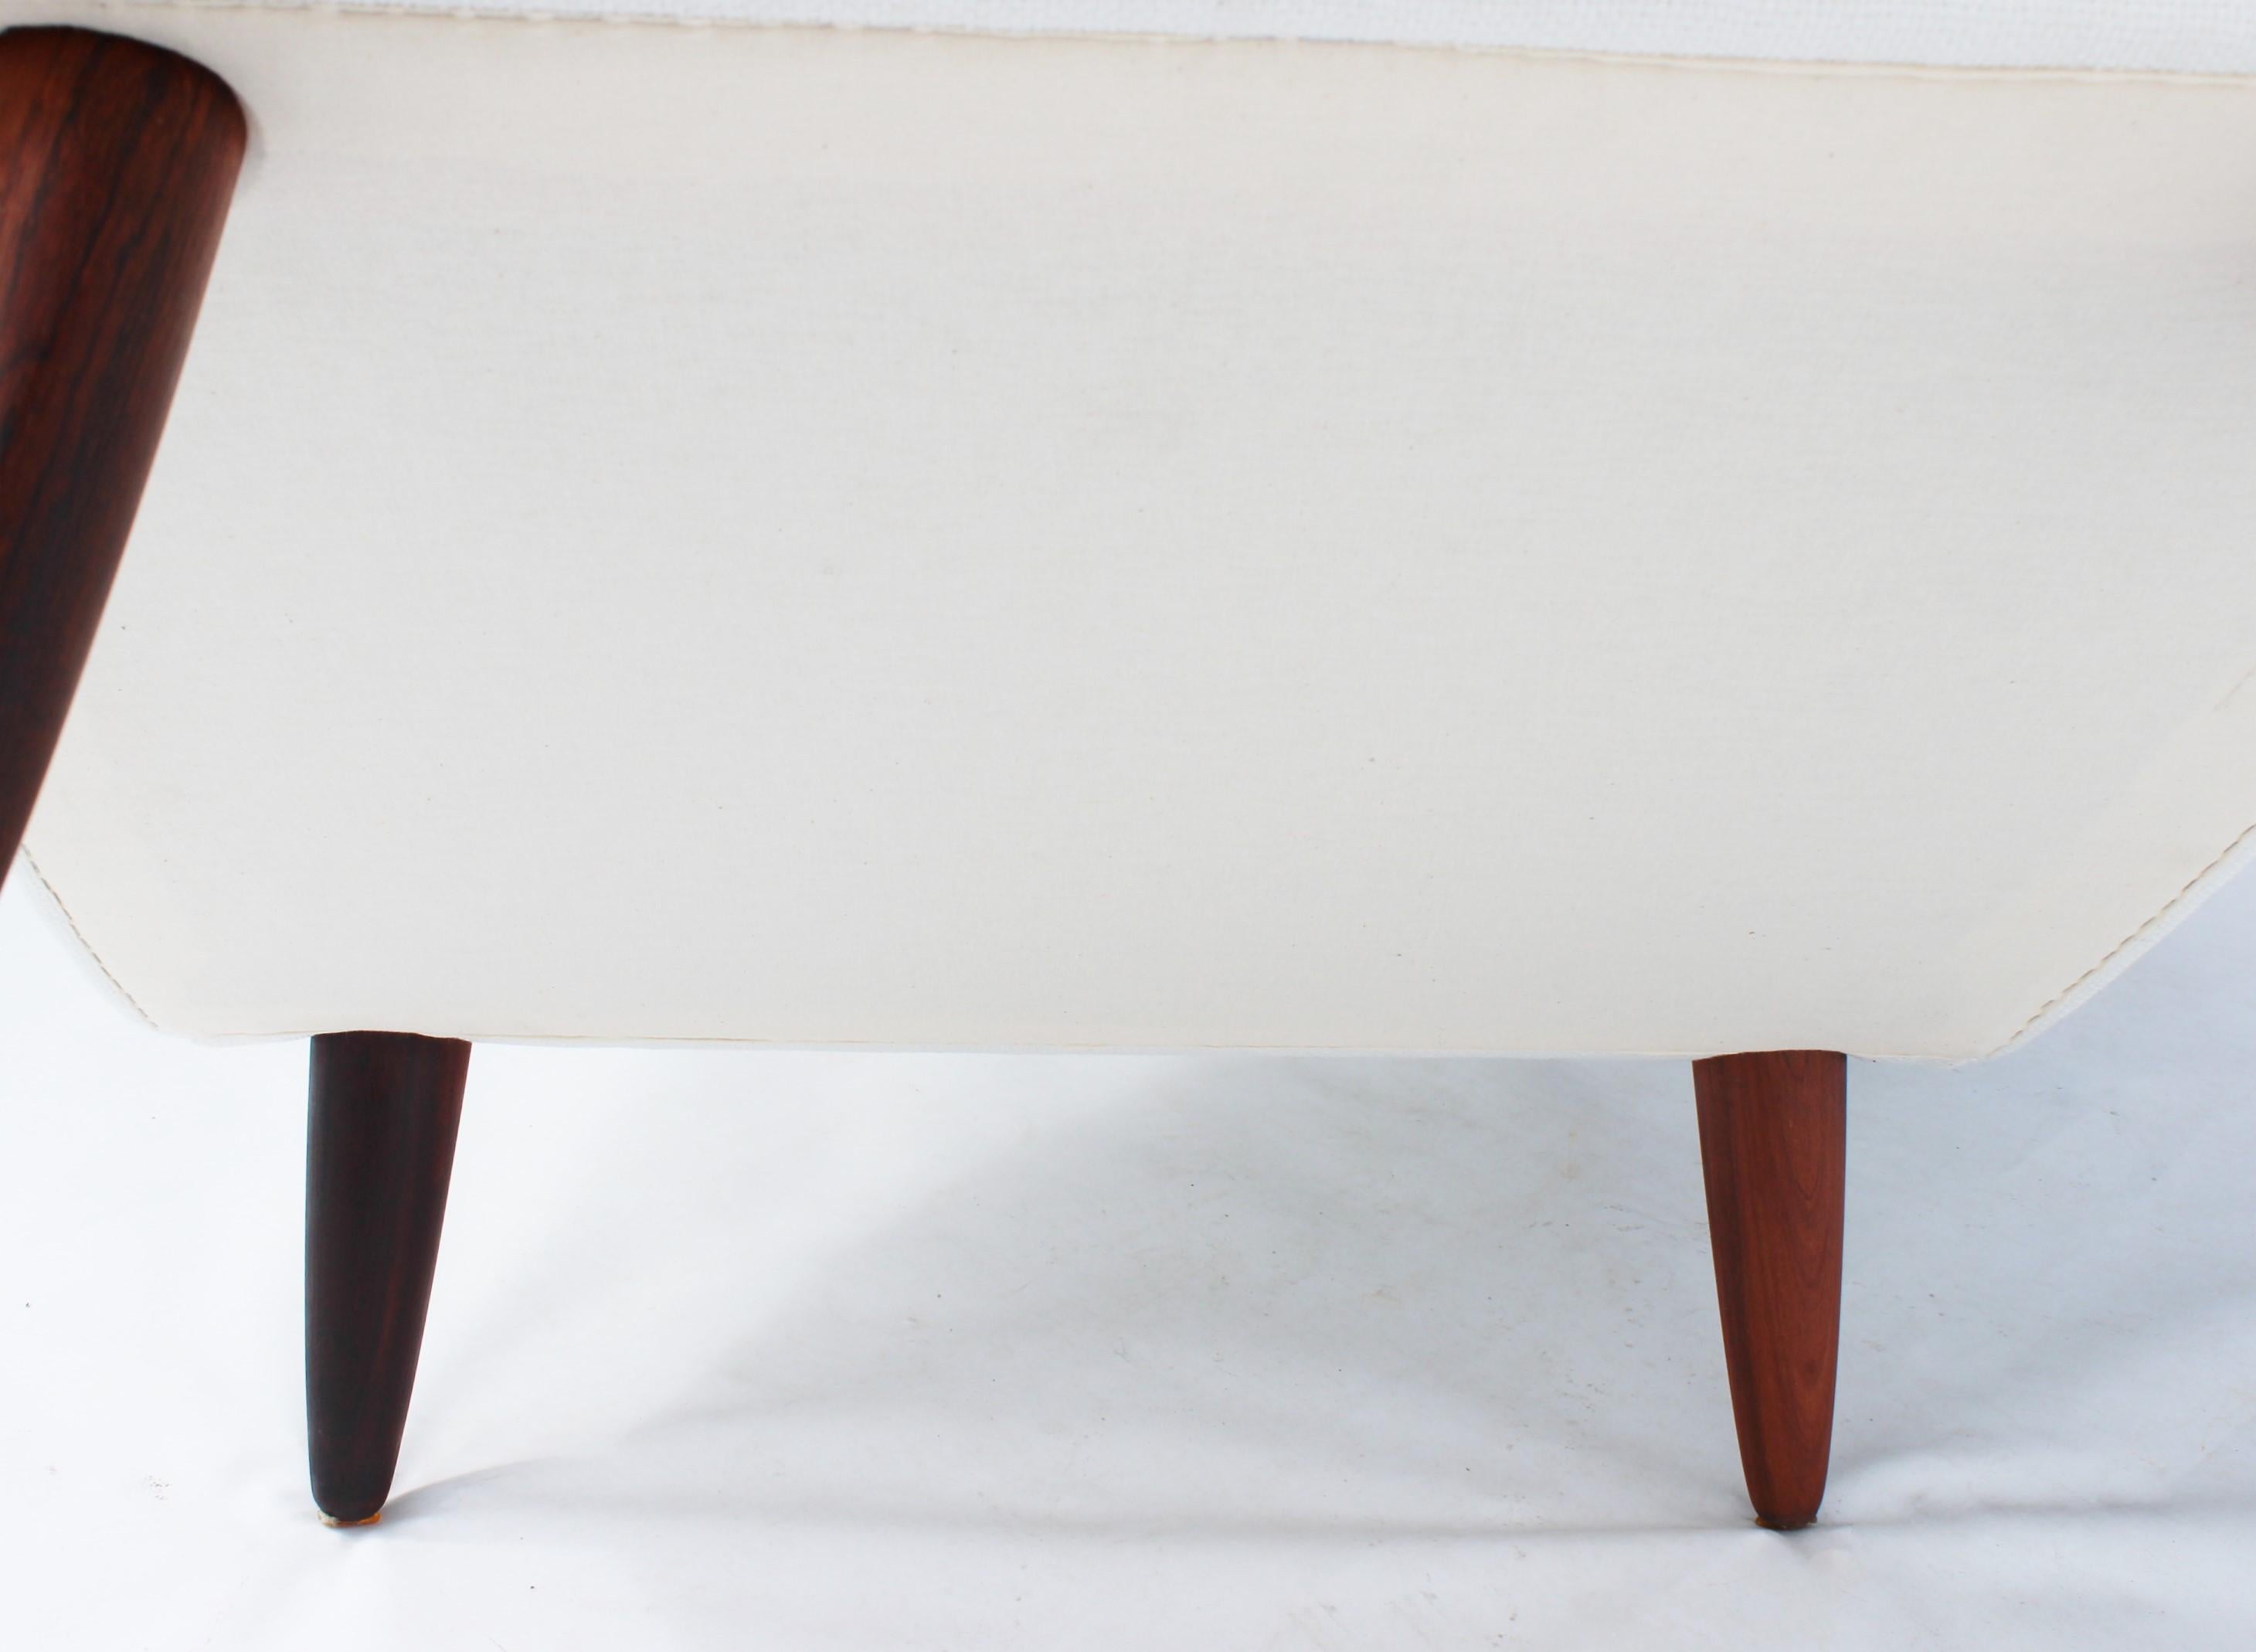 Easy Chair with Tall Back Upholstered in White Fabric, Danish Design, 1960s For Sale 2